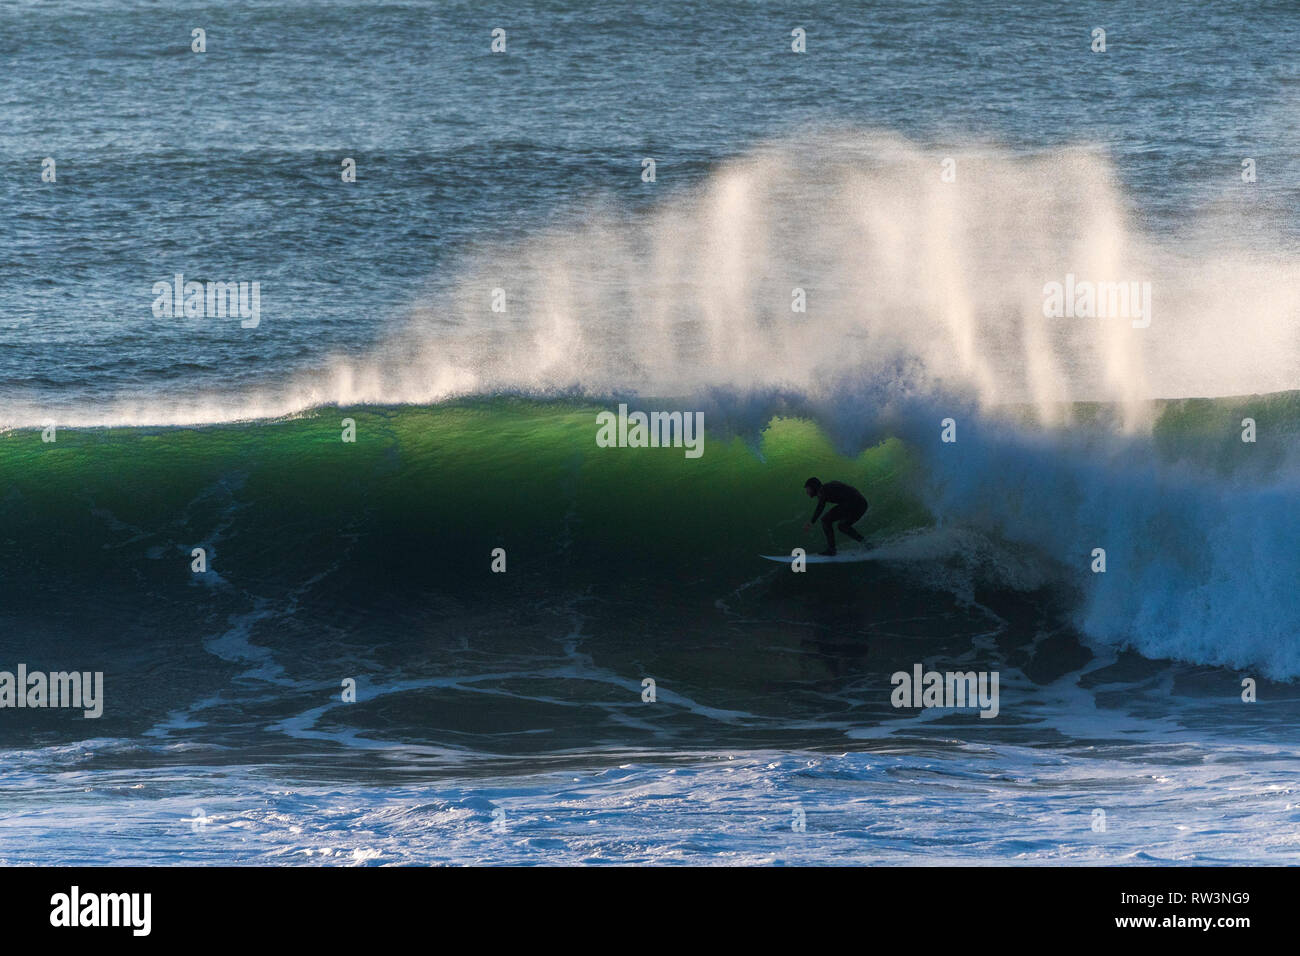 A surfer riding a big wave off the coast of Newquay Cornwall. Stock Photo